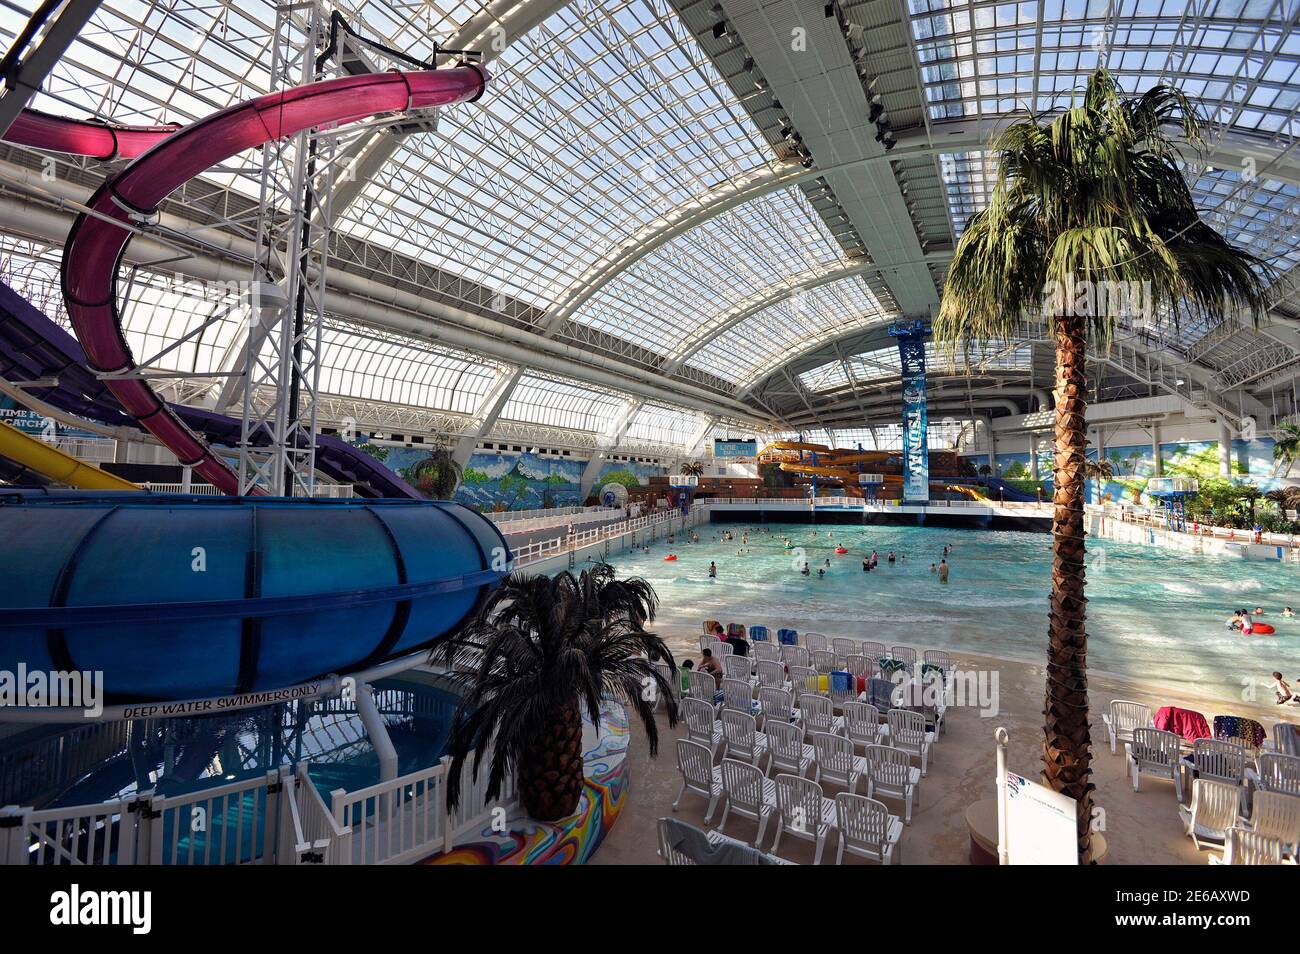 The World Waterpark As Seen At The 5 3 Million Square Foot 492 000 Square Metre West Edmonton Mall In Edmonton Alberta February 26 15 Reuters Dan Riedlhuber Canada s Business Society Stock Photo Alamy